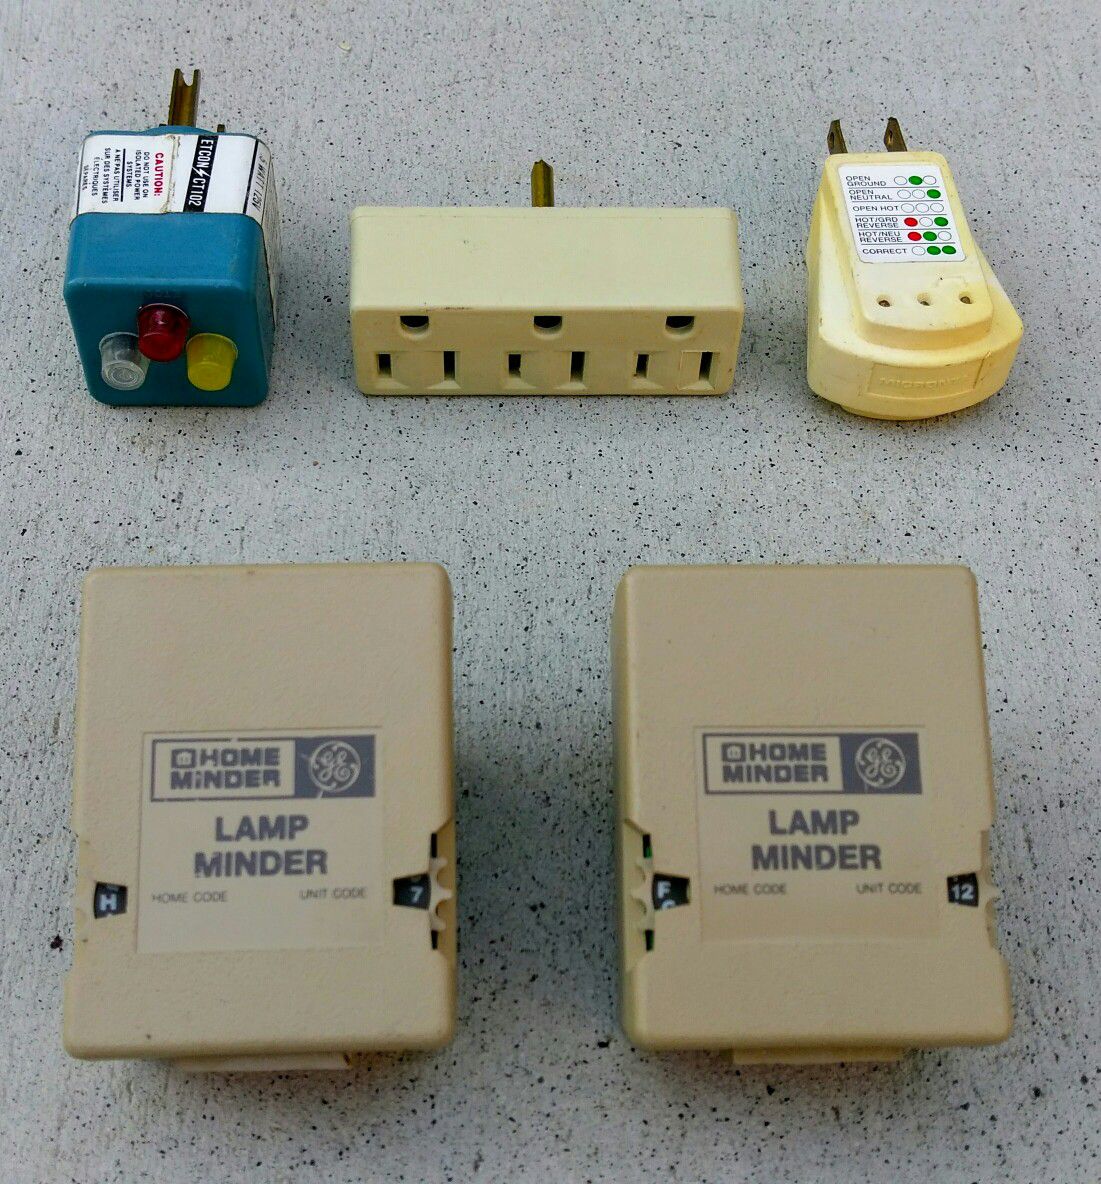 Vintage lamp minders, outlet circuit testers and a 3-plug wall tap adapter